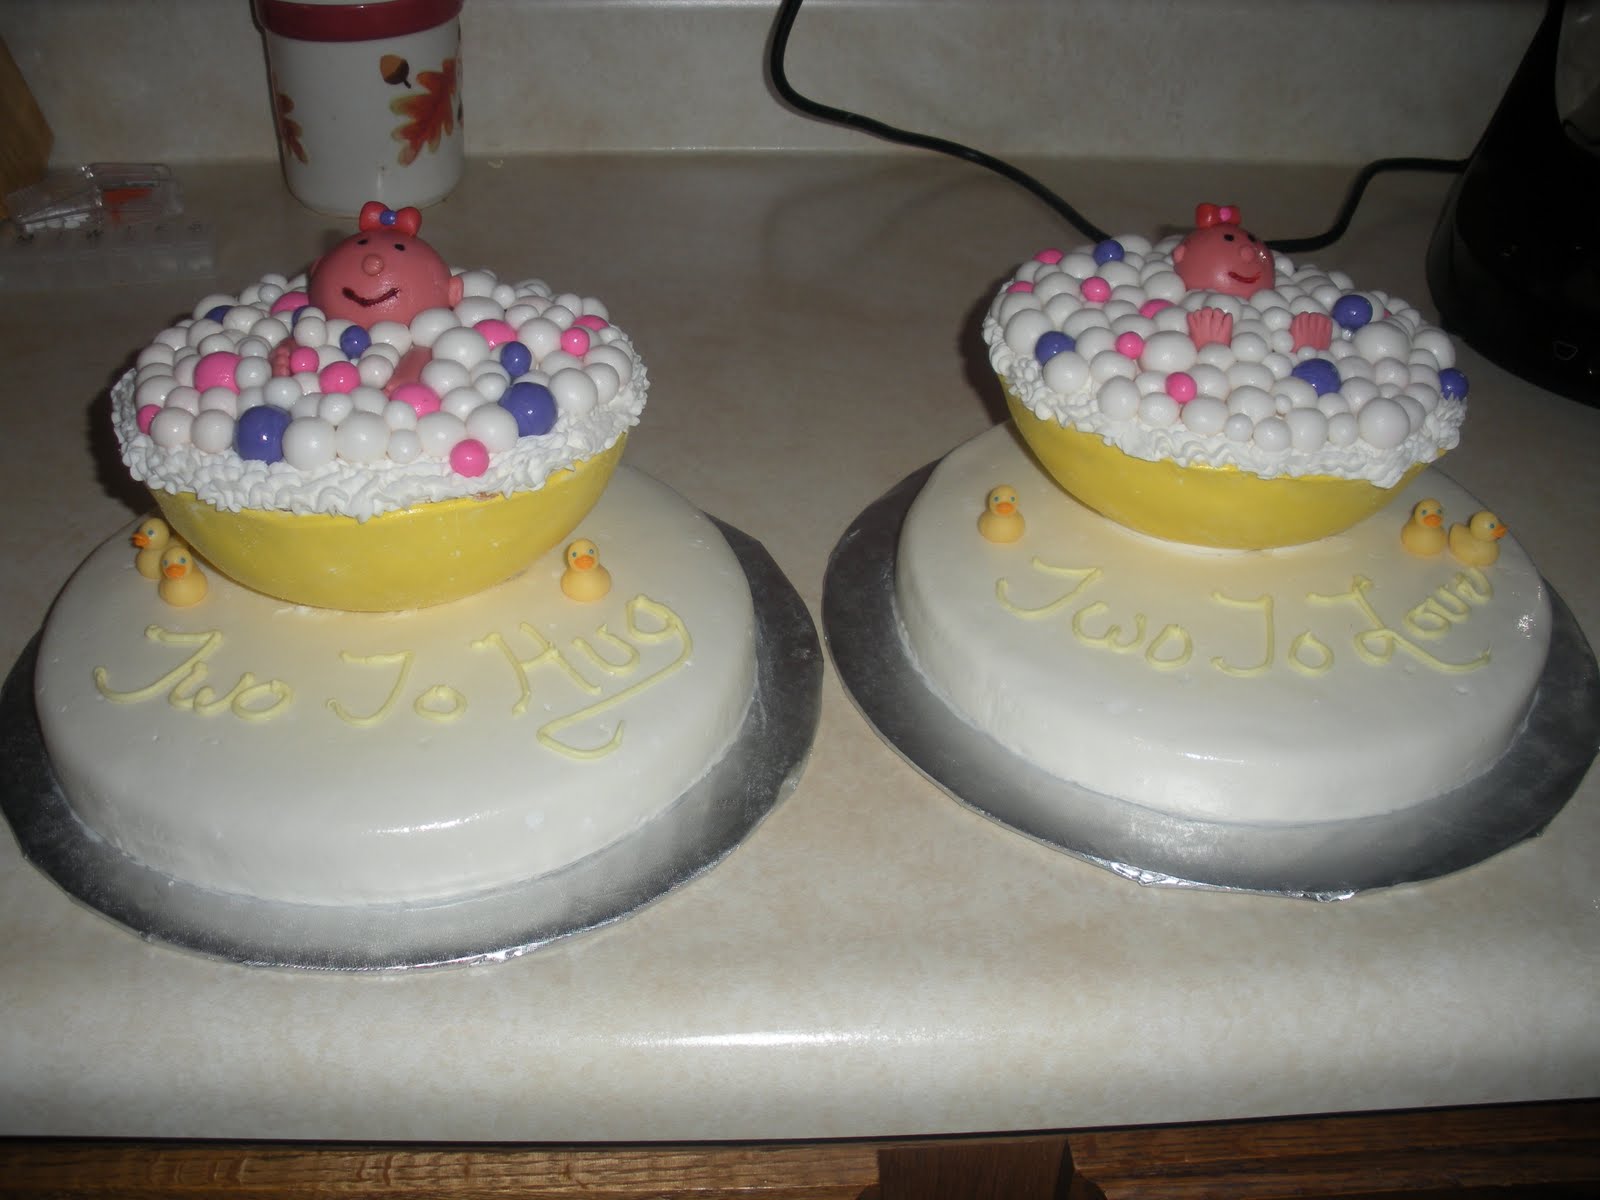 ... much fun making these cakes for a baby shower, twin girls